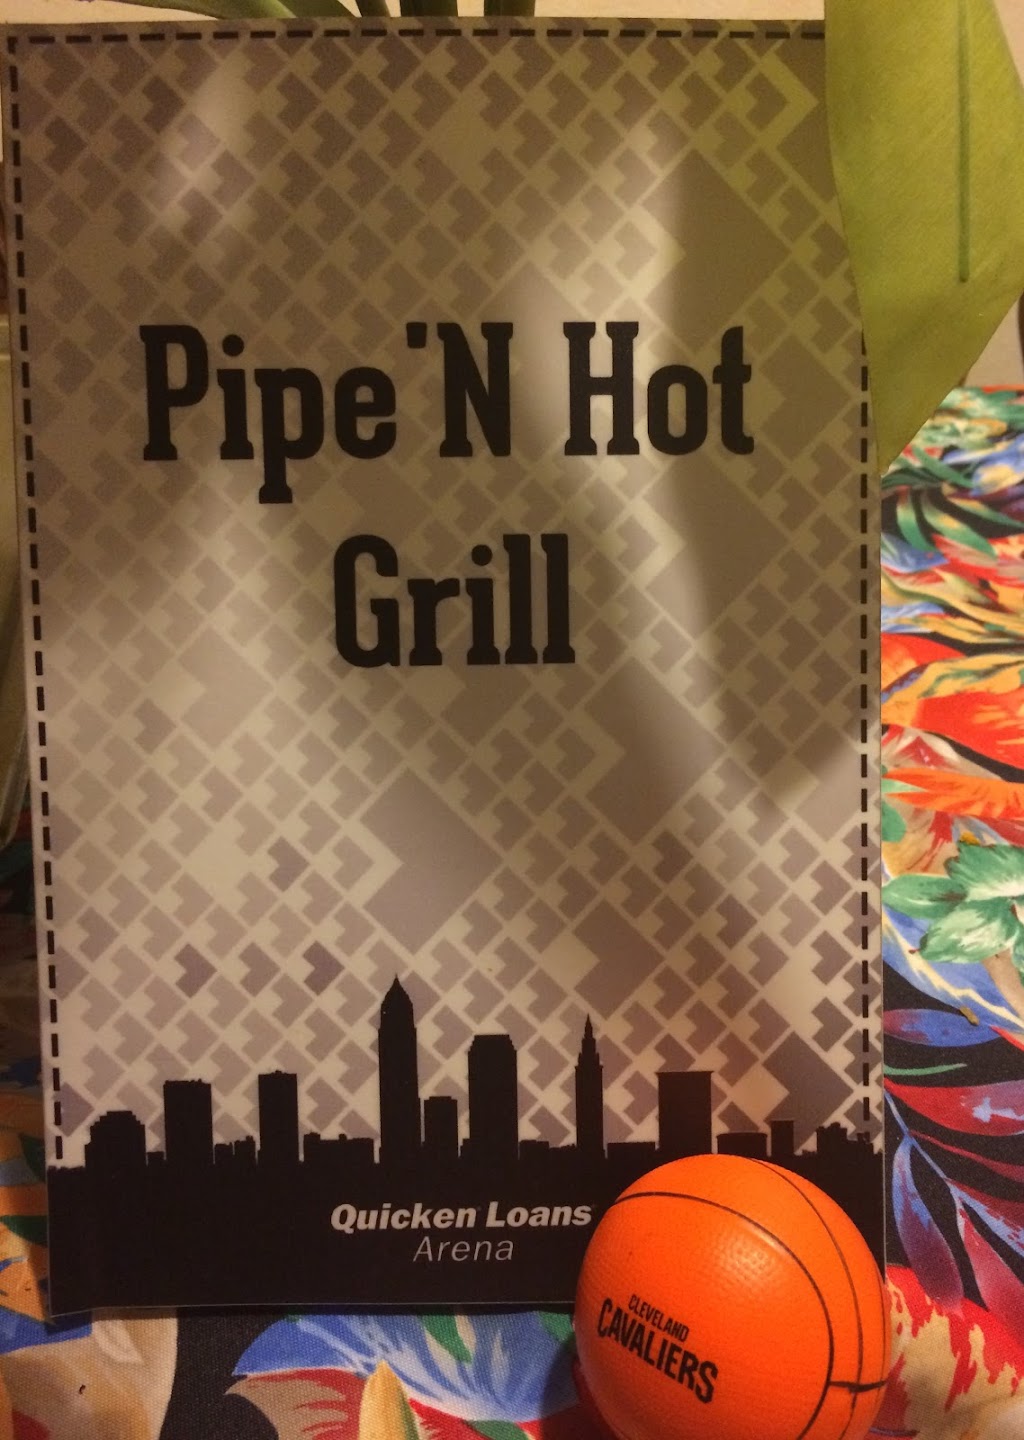 PipeN Hot Grill - restaurant  | Photo 5 of 10 | Address: 1400 E 105th St, Cleveland, OH 44106, USA | Phone: (216) 795-5250